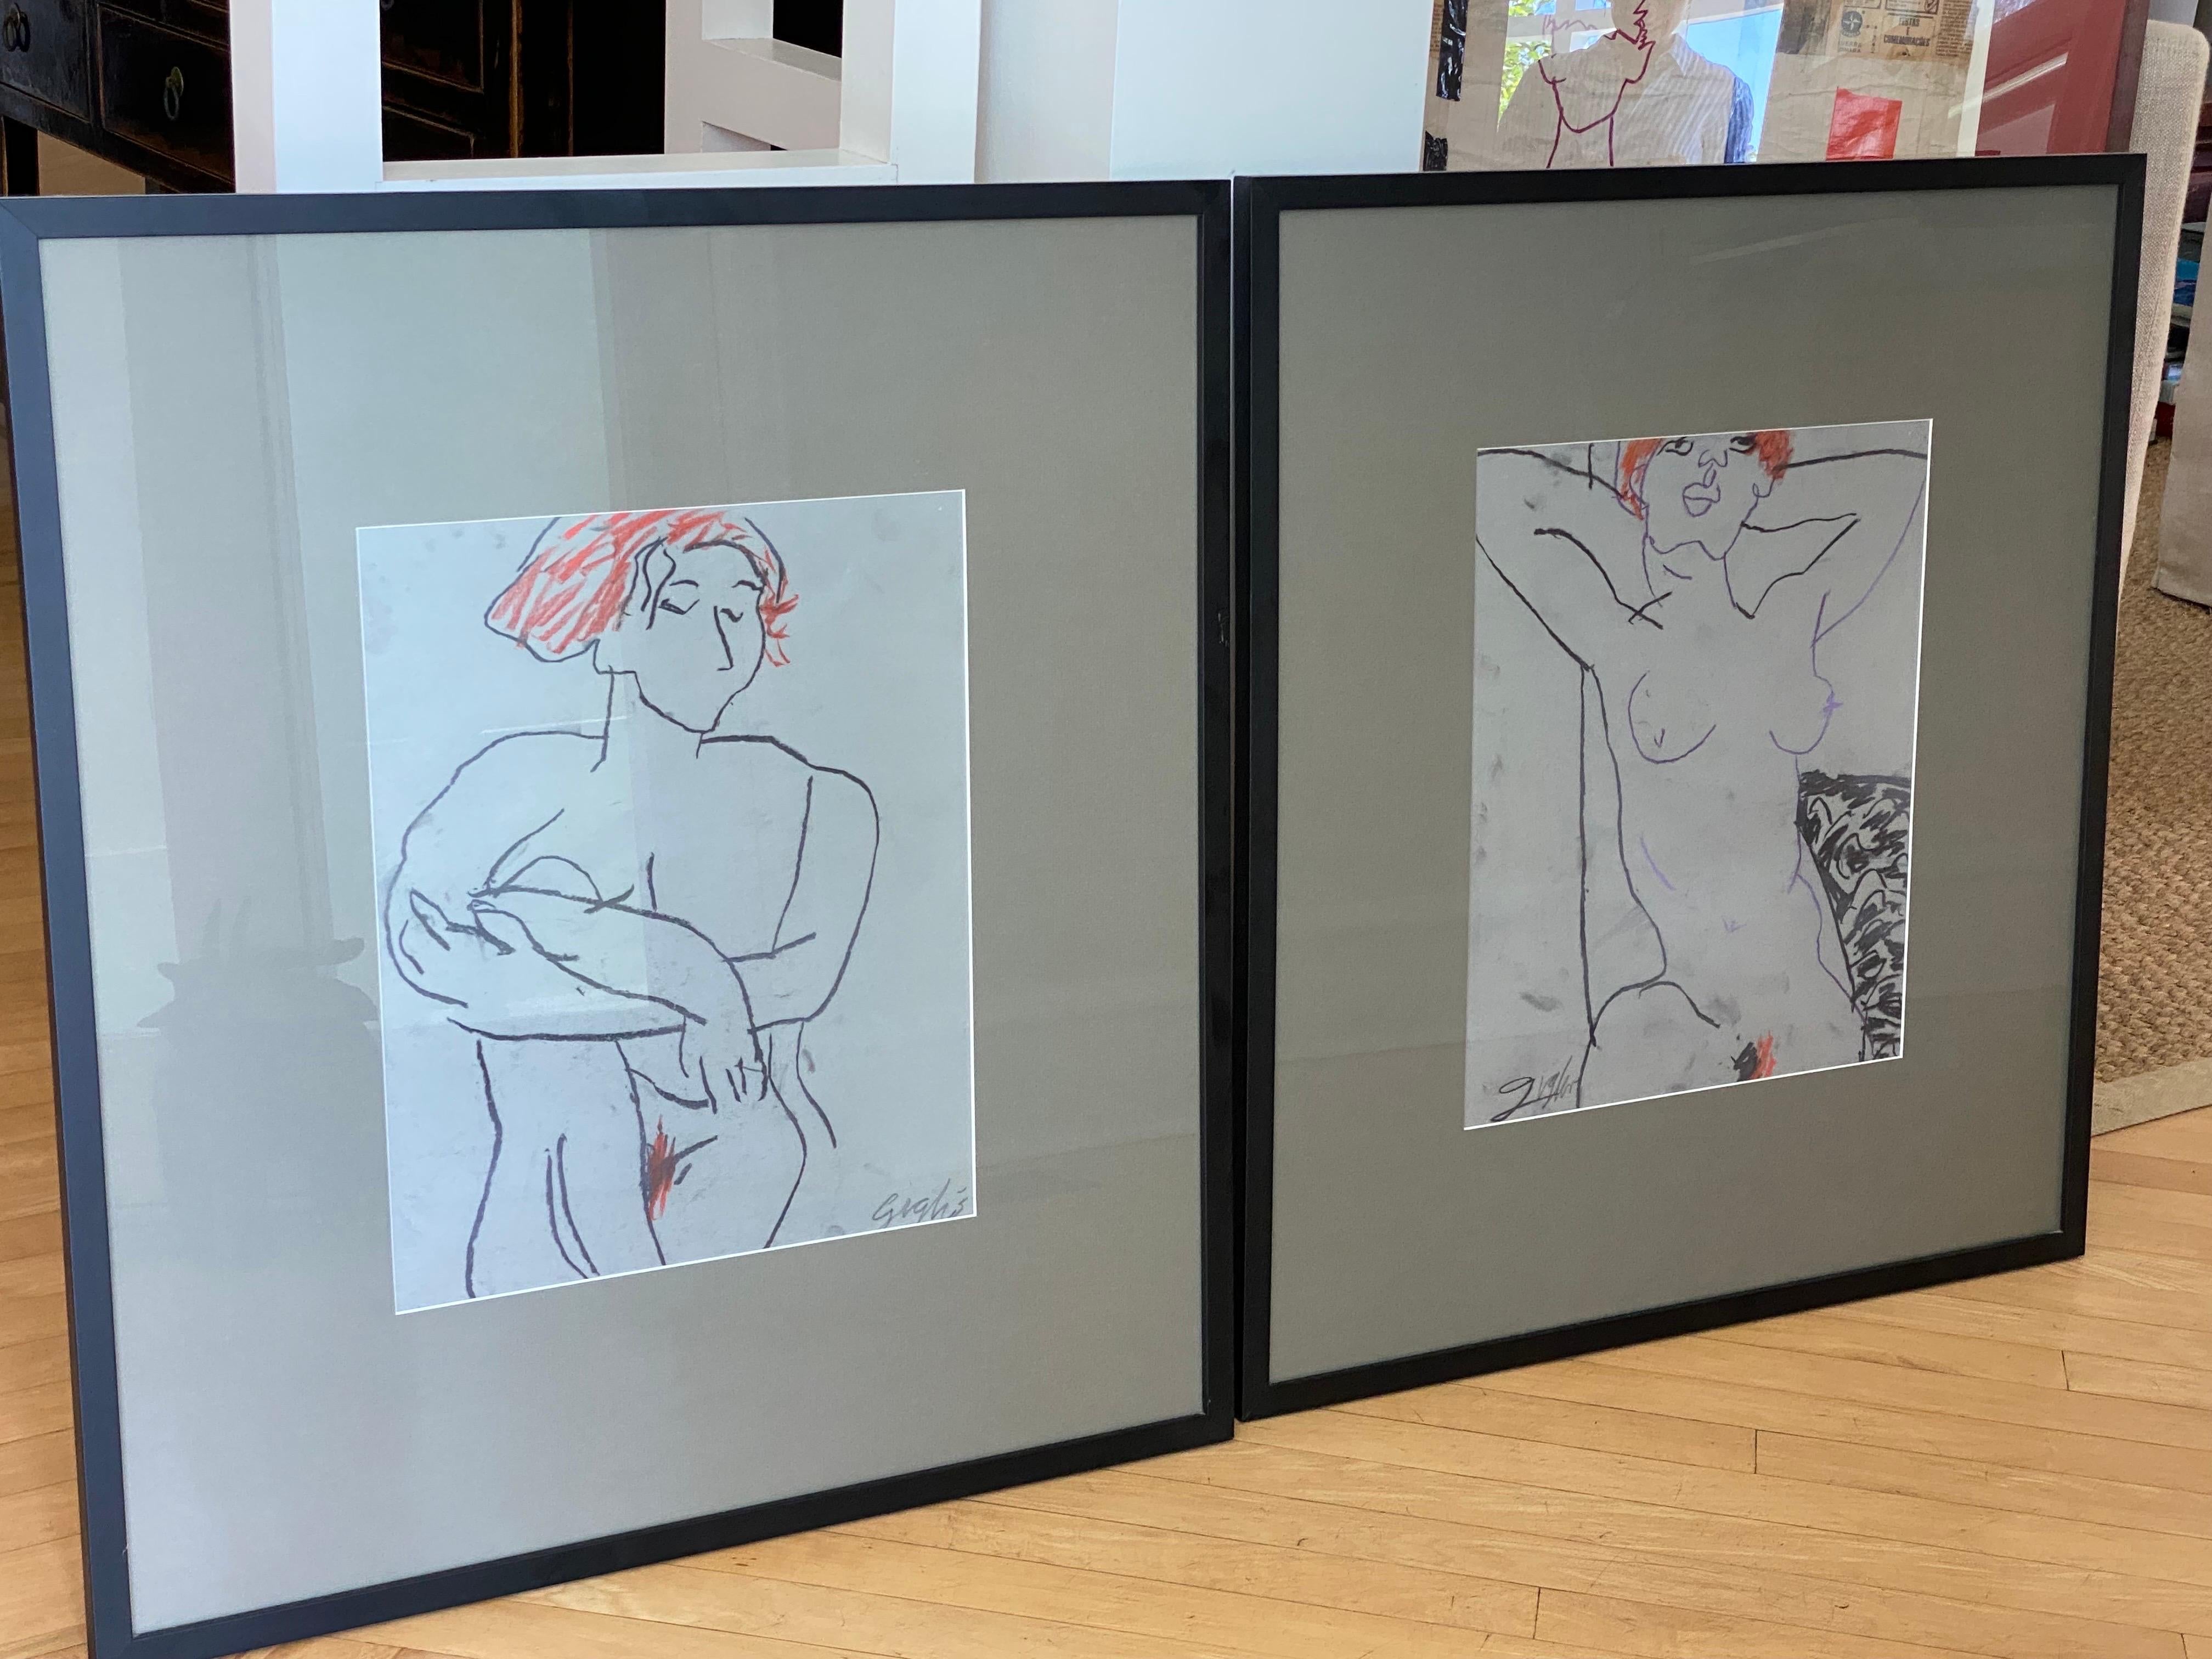 Richard Giglio, American, b. 1936
Nude Studies,
Crayon on Vellum,
Signed
Measures: 26.5